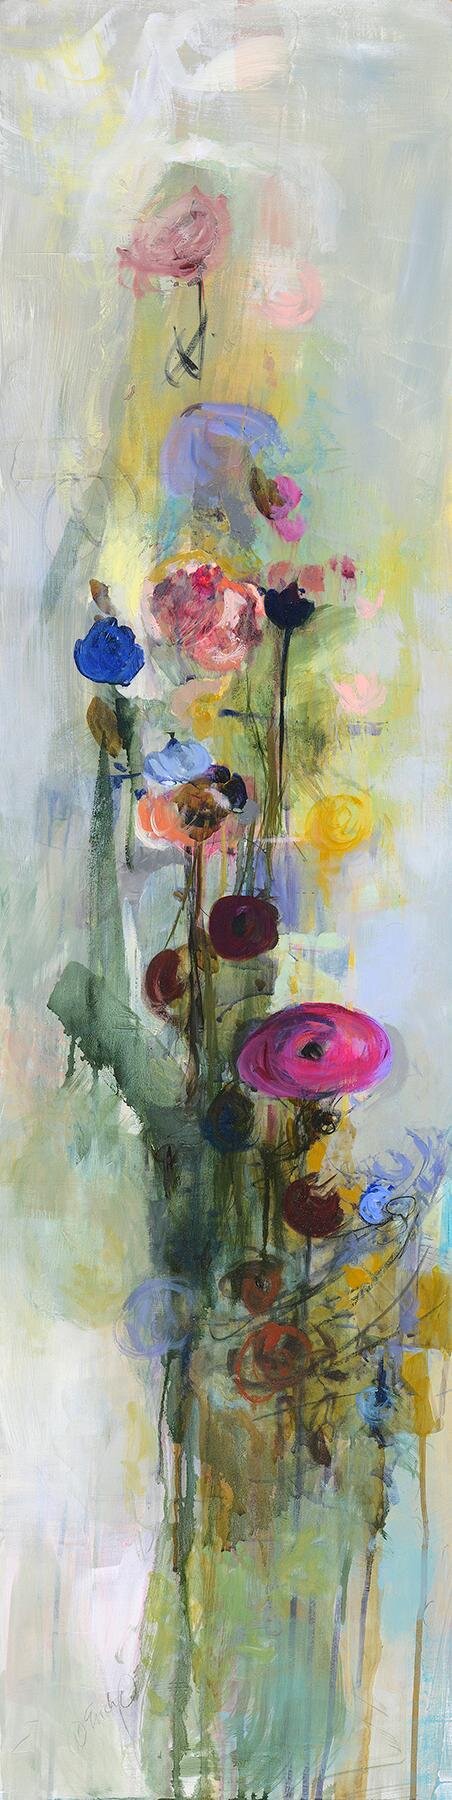   Blossom I  Oil on wood 48x12 inches SOLD 